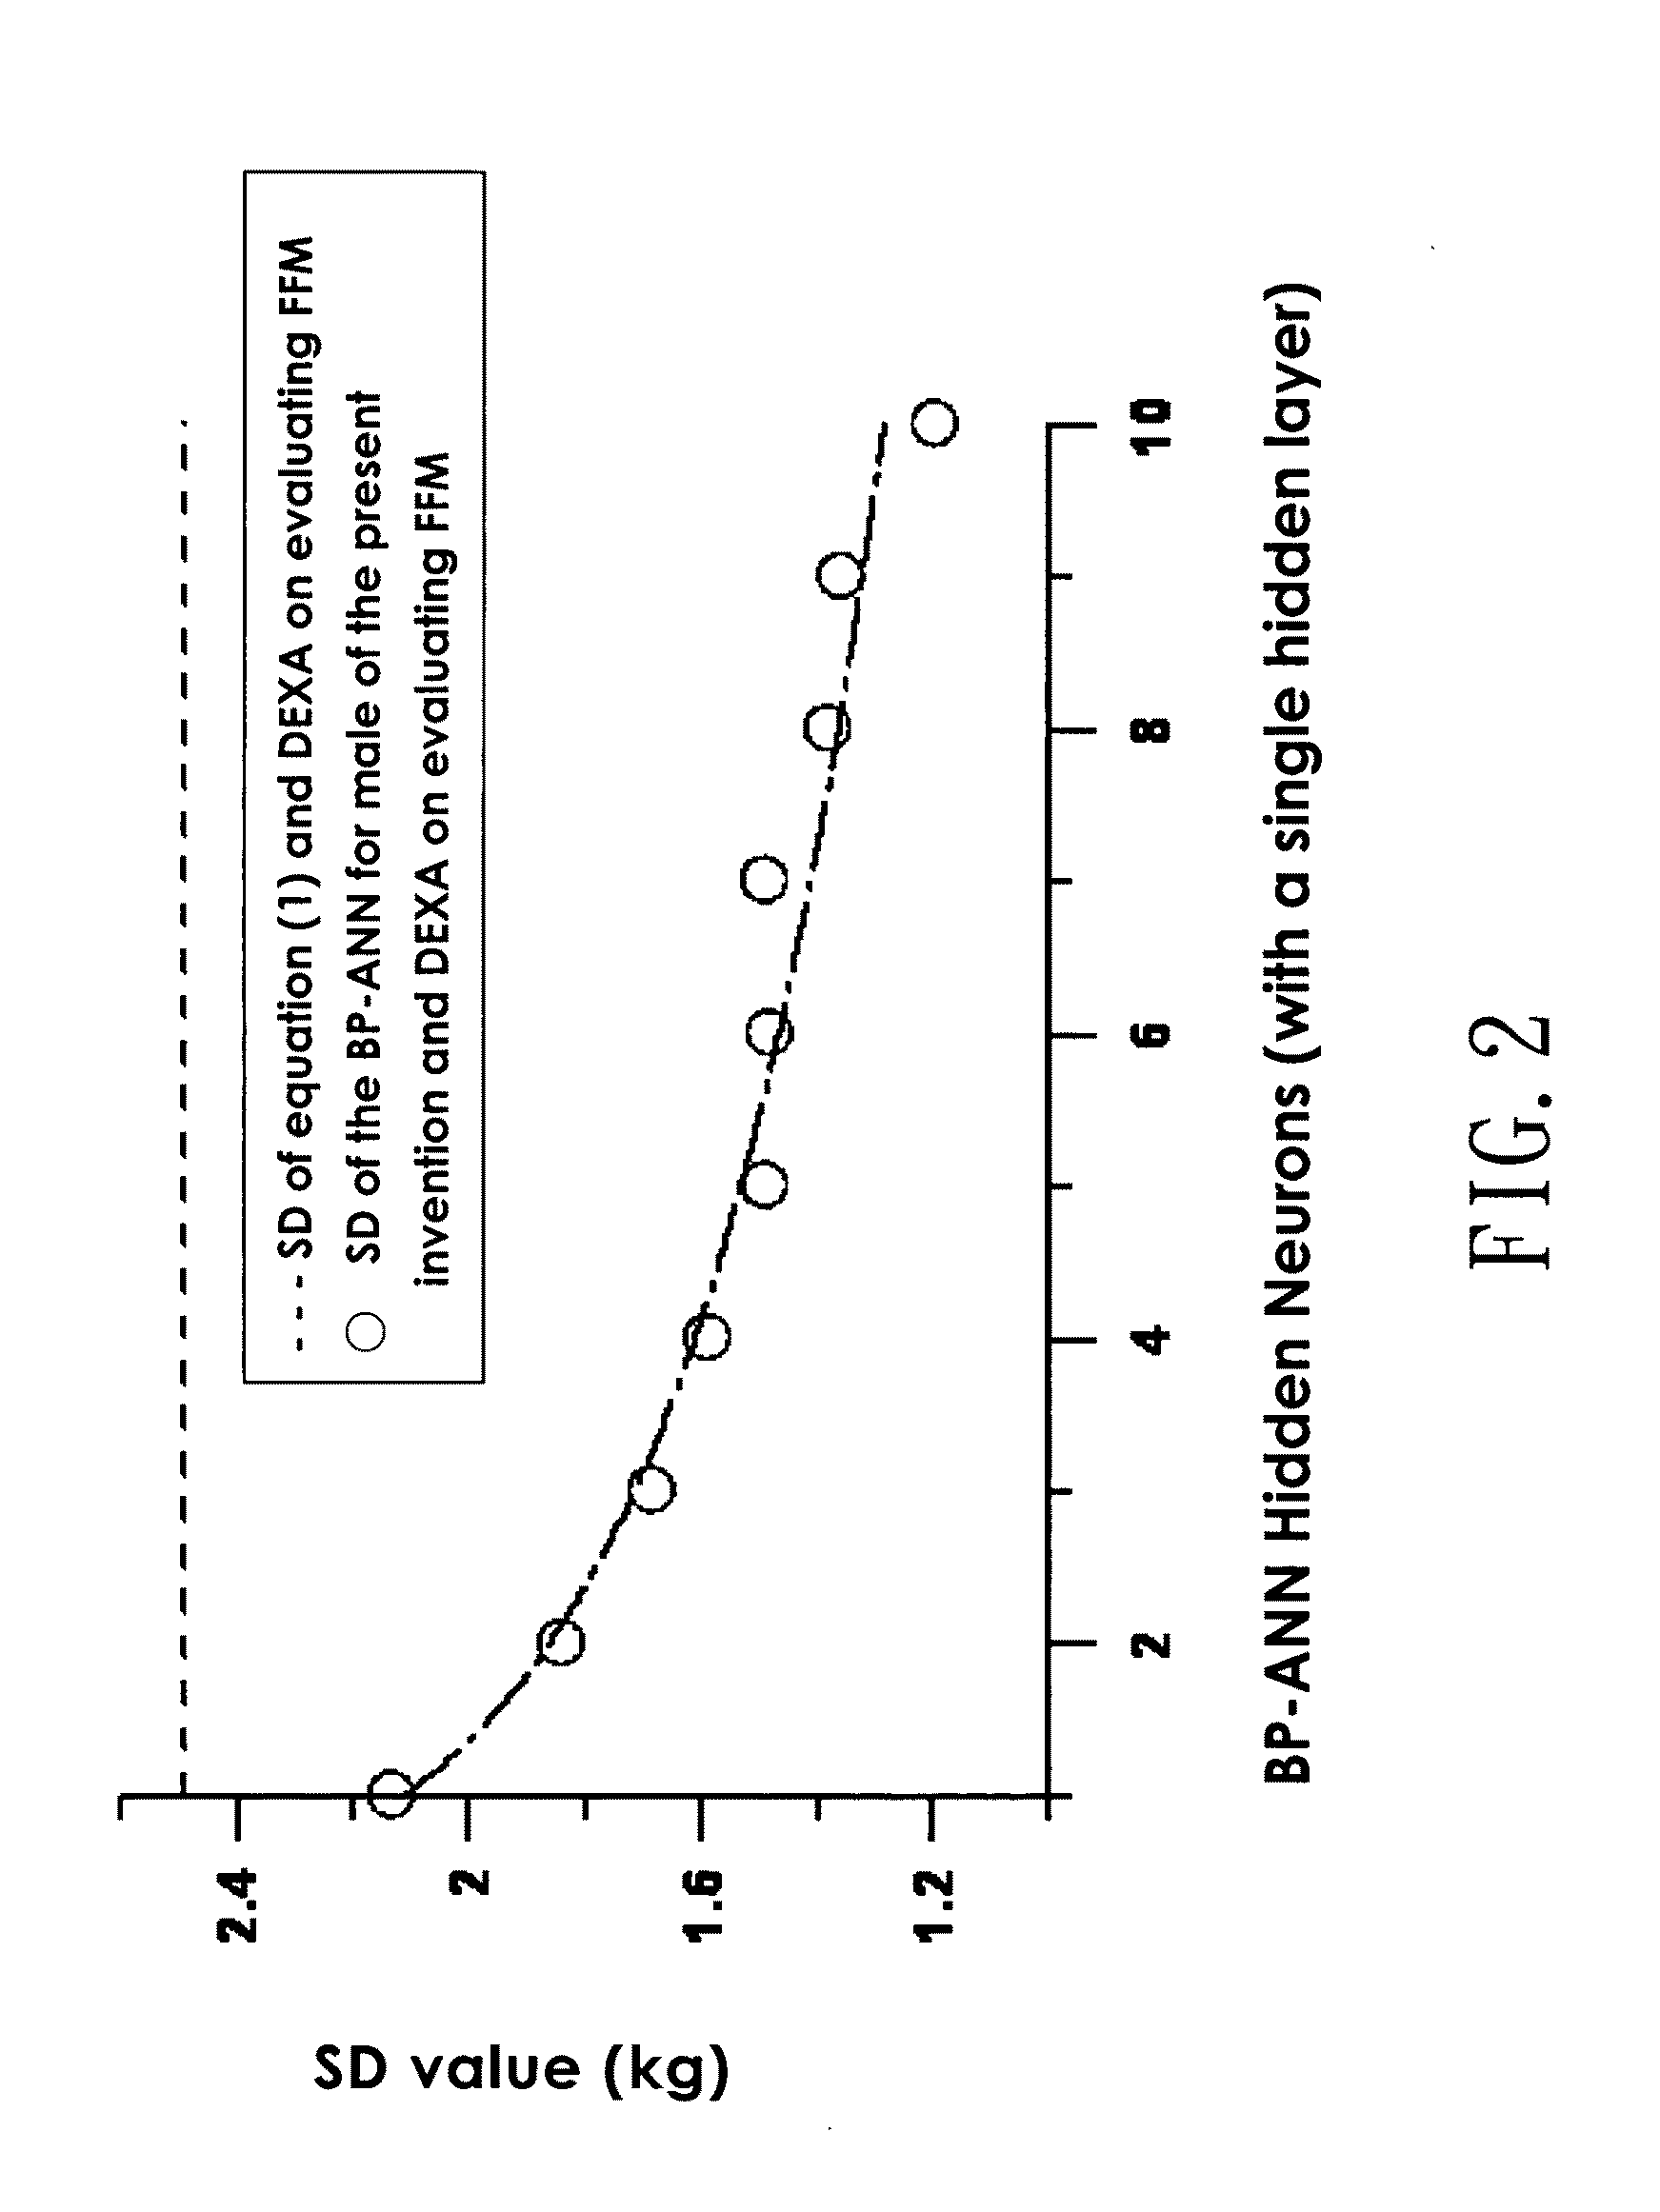 Body composition measuring apparatus using a bioelectric impedance analysis associated with a neural network algorithm